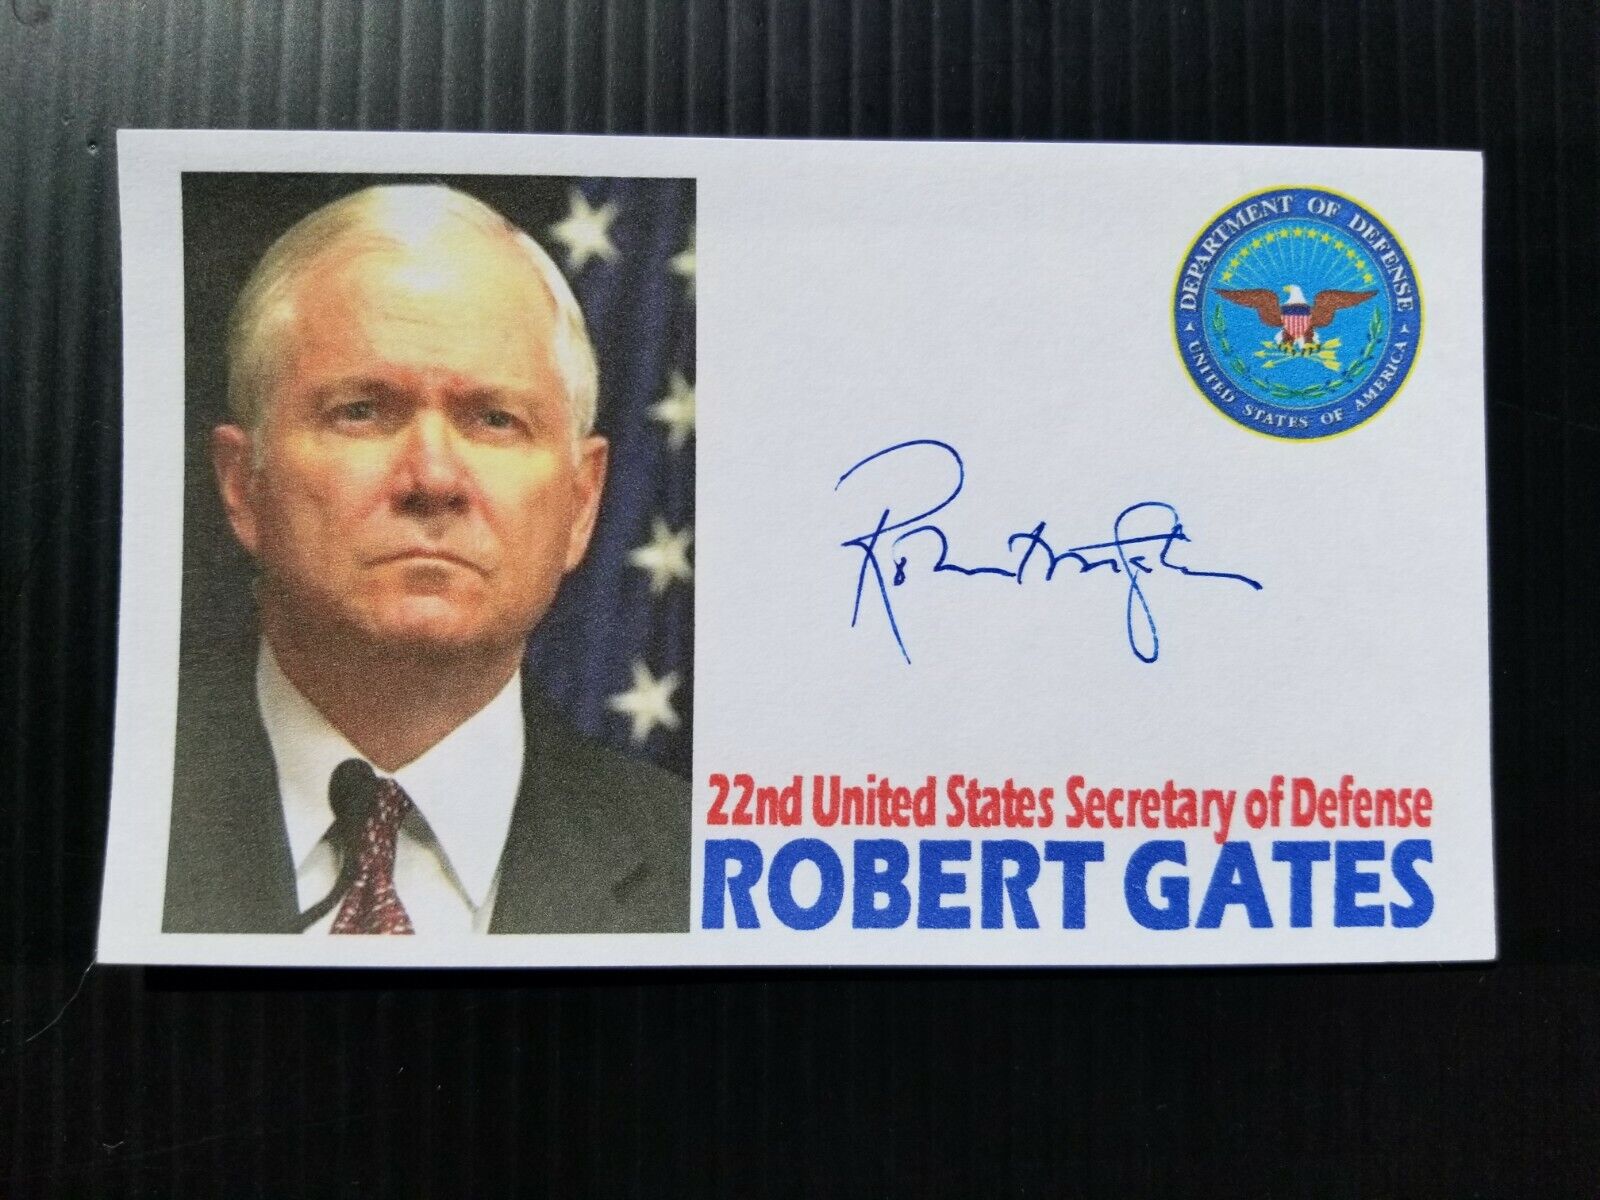 ROBERT GATES 22nd US SECRETARY OF DEFENSE AUTOGRAPHED 3X5 INCH INDEX CARD